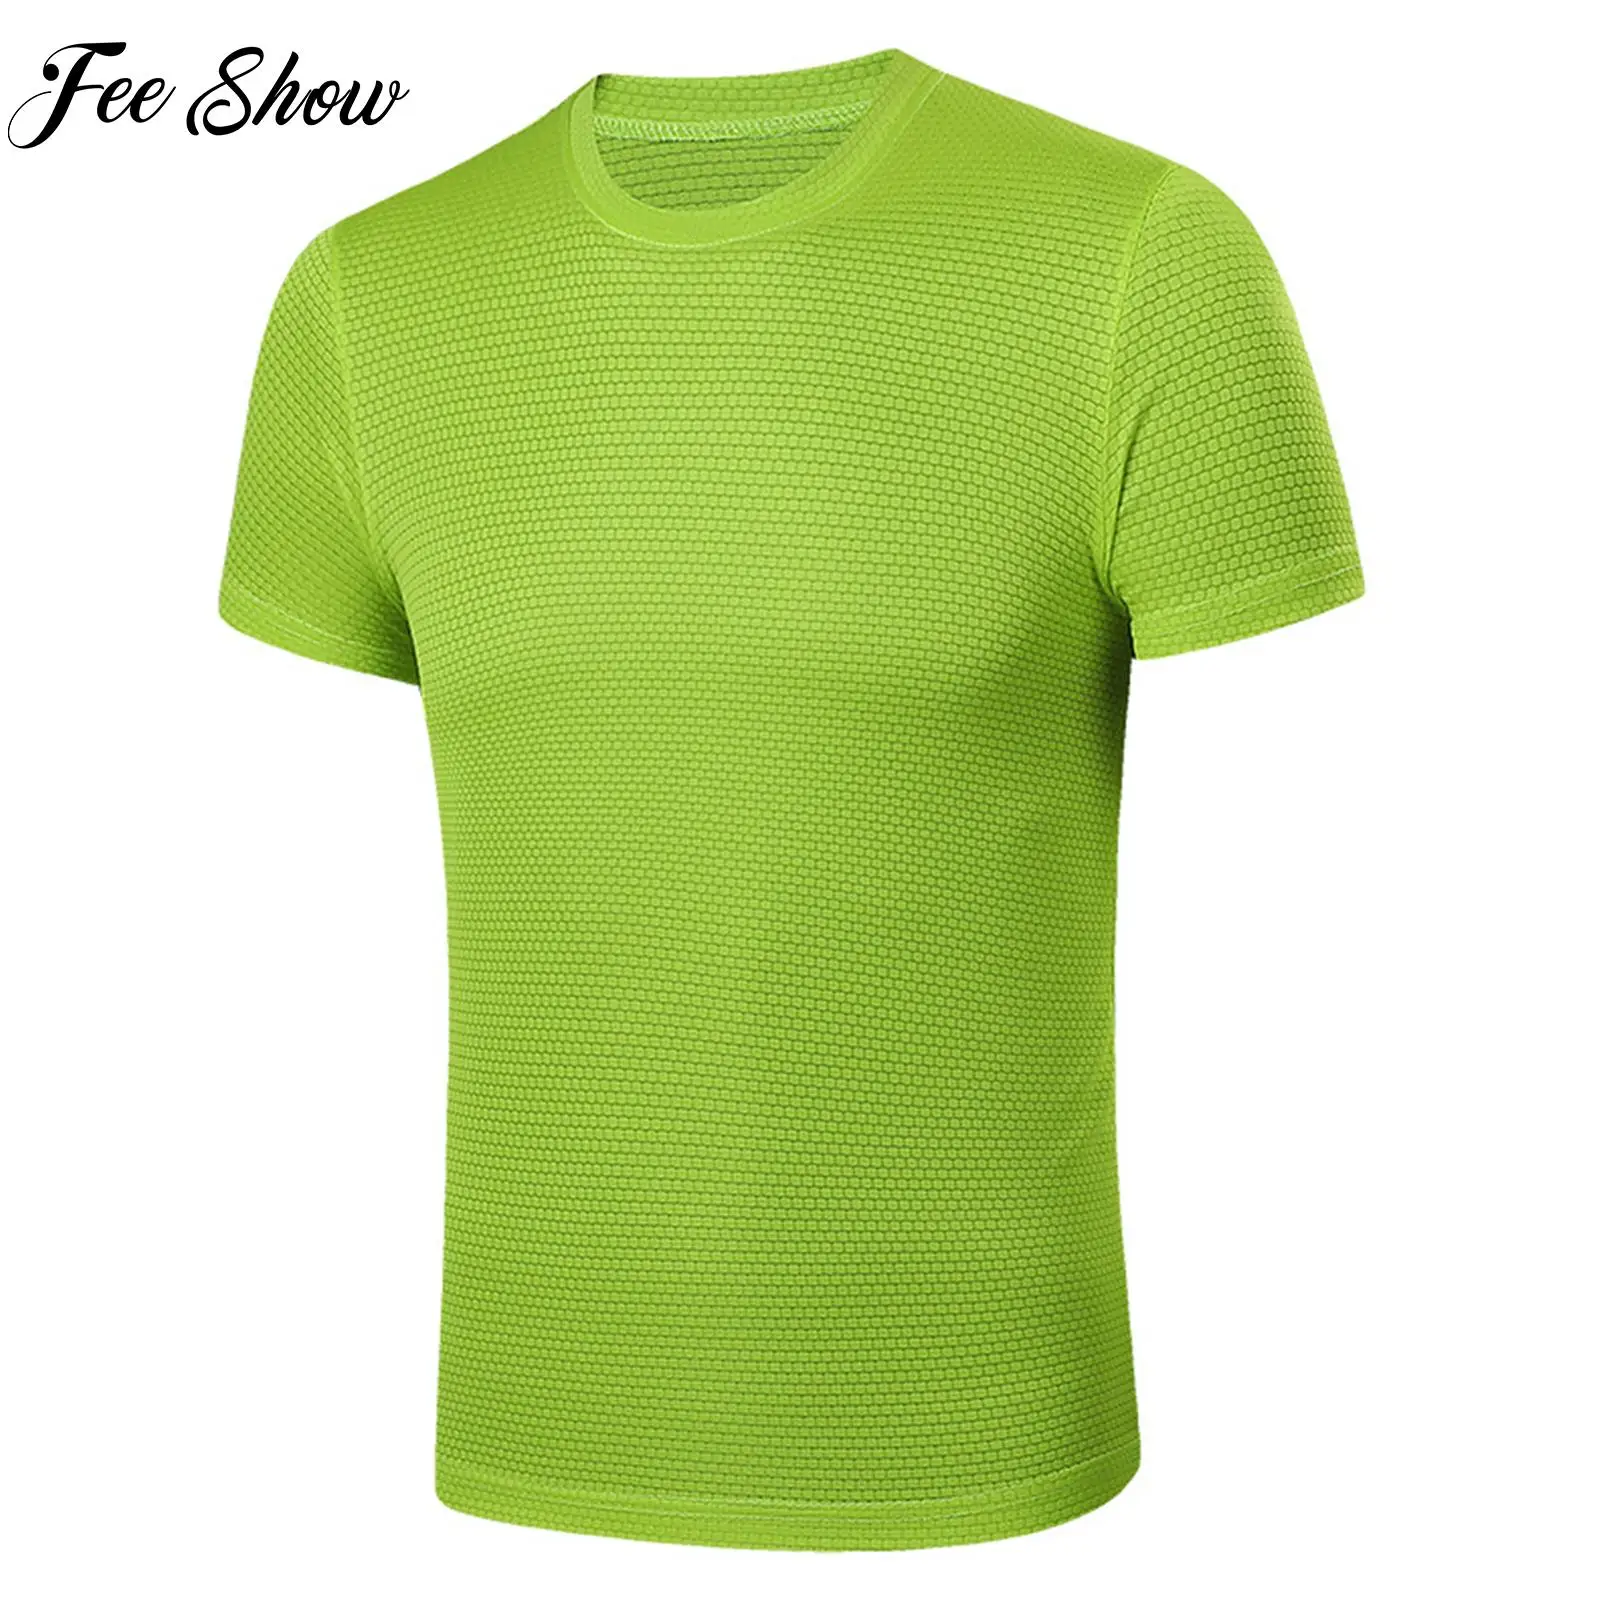 

Mens Casual T-shirts Sports Running Gym Workout Shirt Stretchy Short Sleeve Quick Dry Moisture Wicking Athletic T-shirt Top Tees